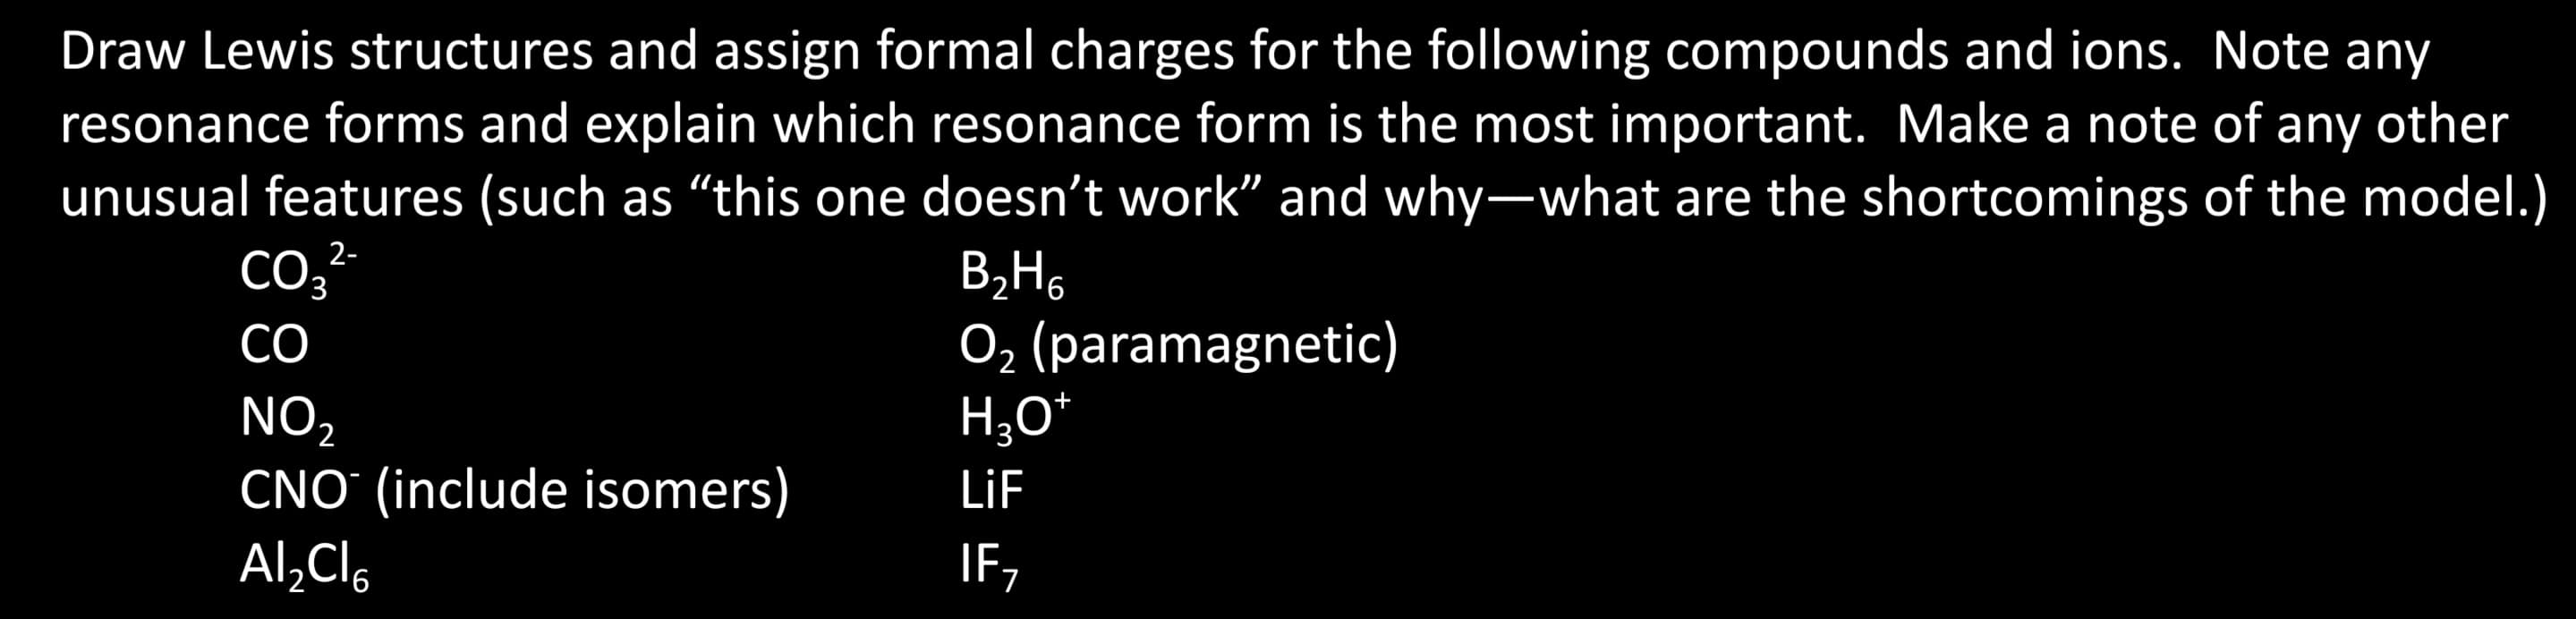 Draw Lewis structures and assign formal charges for the following compounds and ions. Note any
resonance forms and explain which resonance form is the most important. Make a note of any other
unusual features (such as "this one doesn't work" and why-what are the shortcomings of the model.)
2-
CO3²-
B₂H6
CO
O₂ (paramagnetic)
H₂O*
LiF
IF,
NO₂
CNO (include isomers)
Al₂Cl6